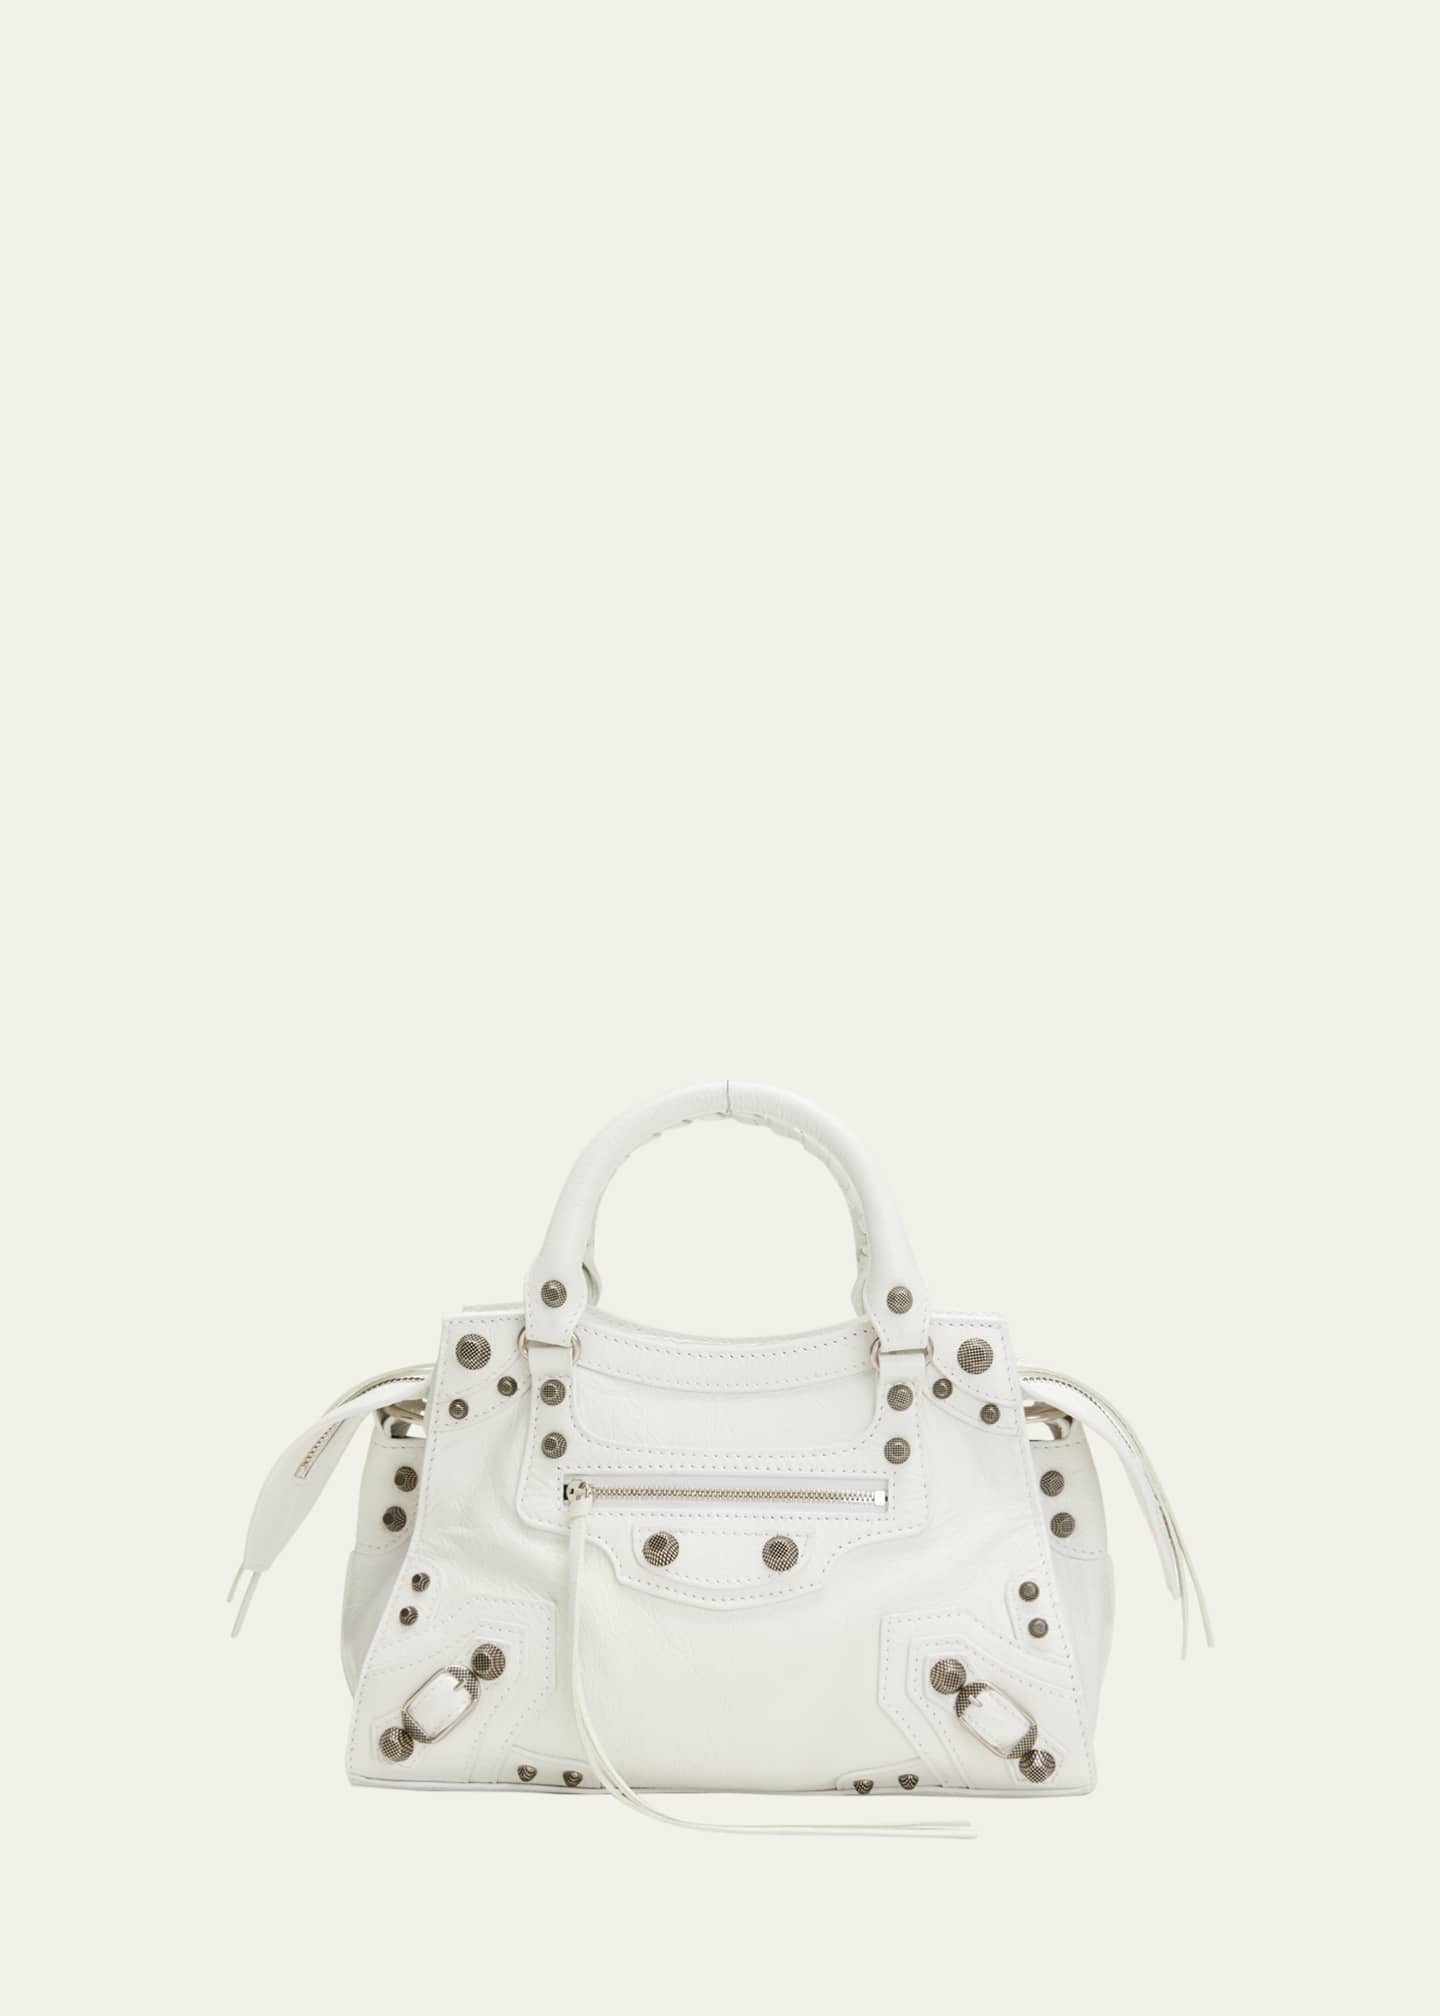 Classic Balenciaga Handbags to Invest in in 2021—From the Biker to the City  Bag